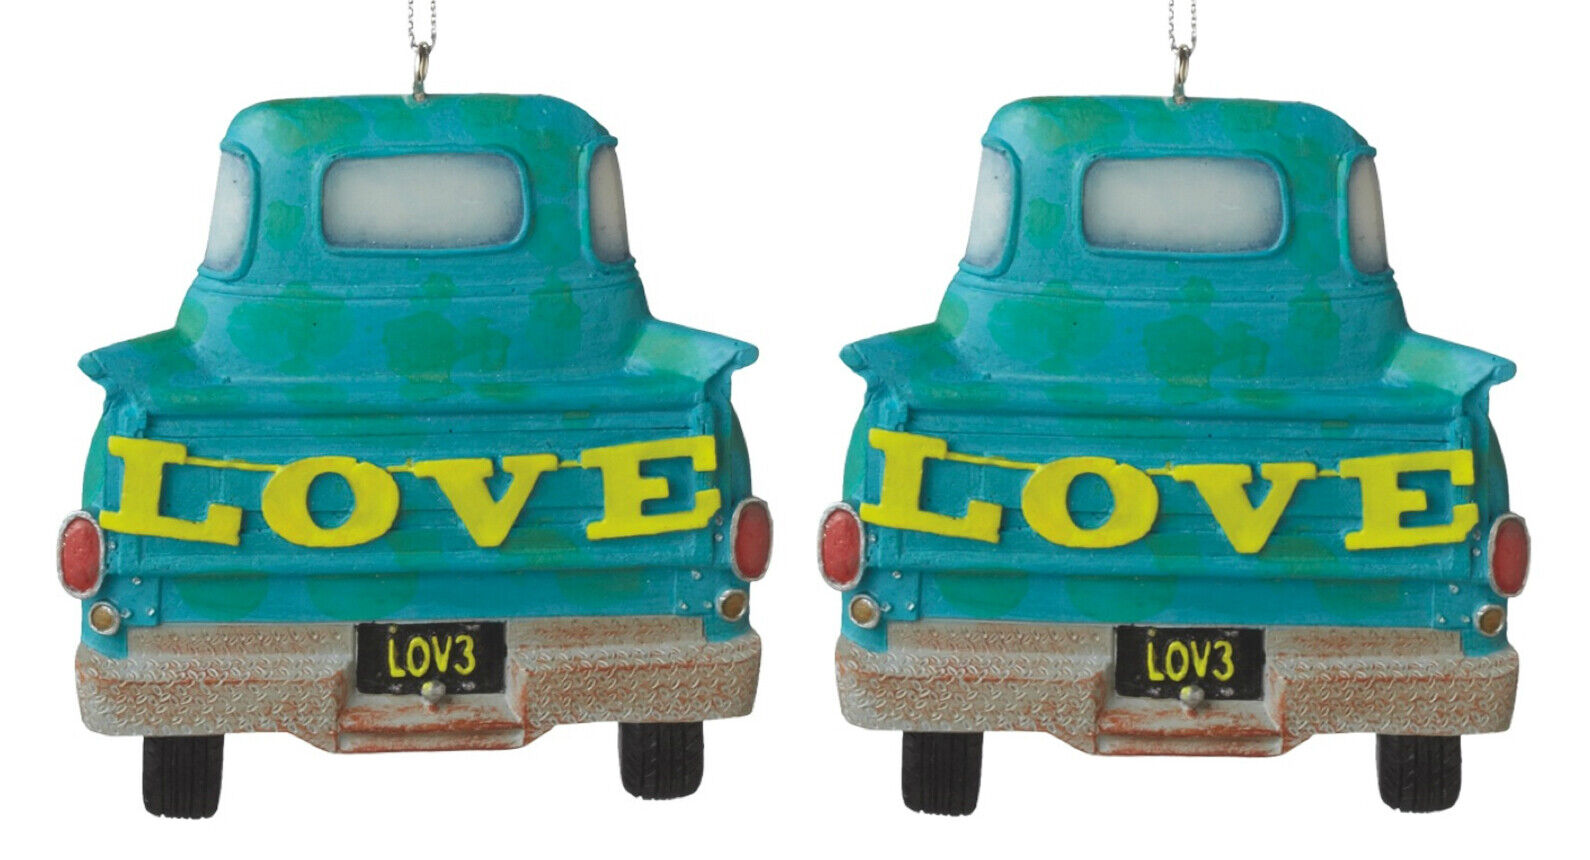 Midwest Cbk Farmer Love Pickup Truck Christmas Holiday Ornaments Set Of 2